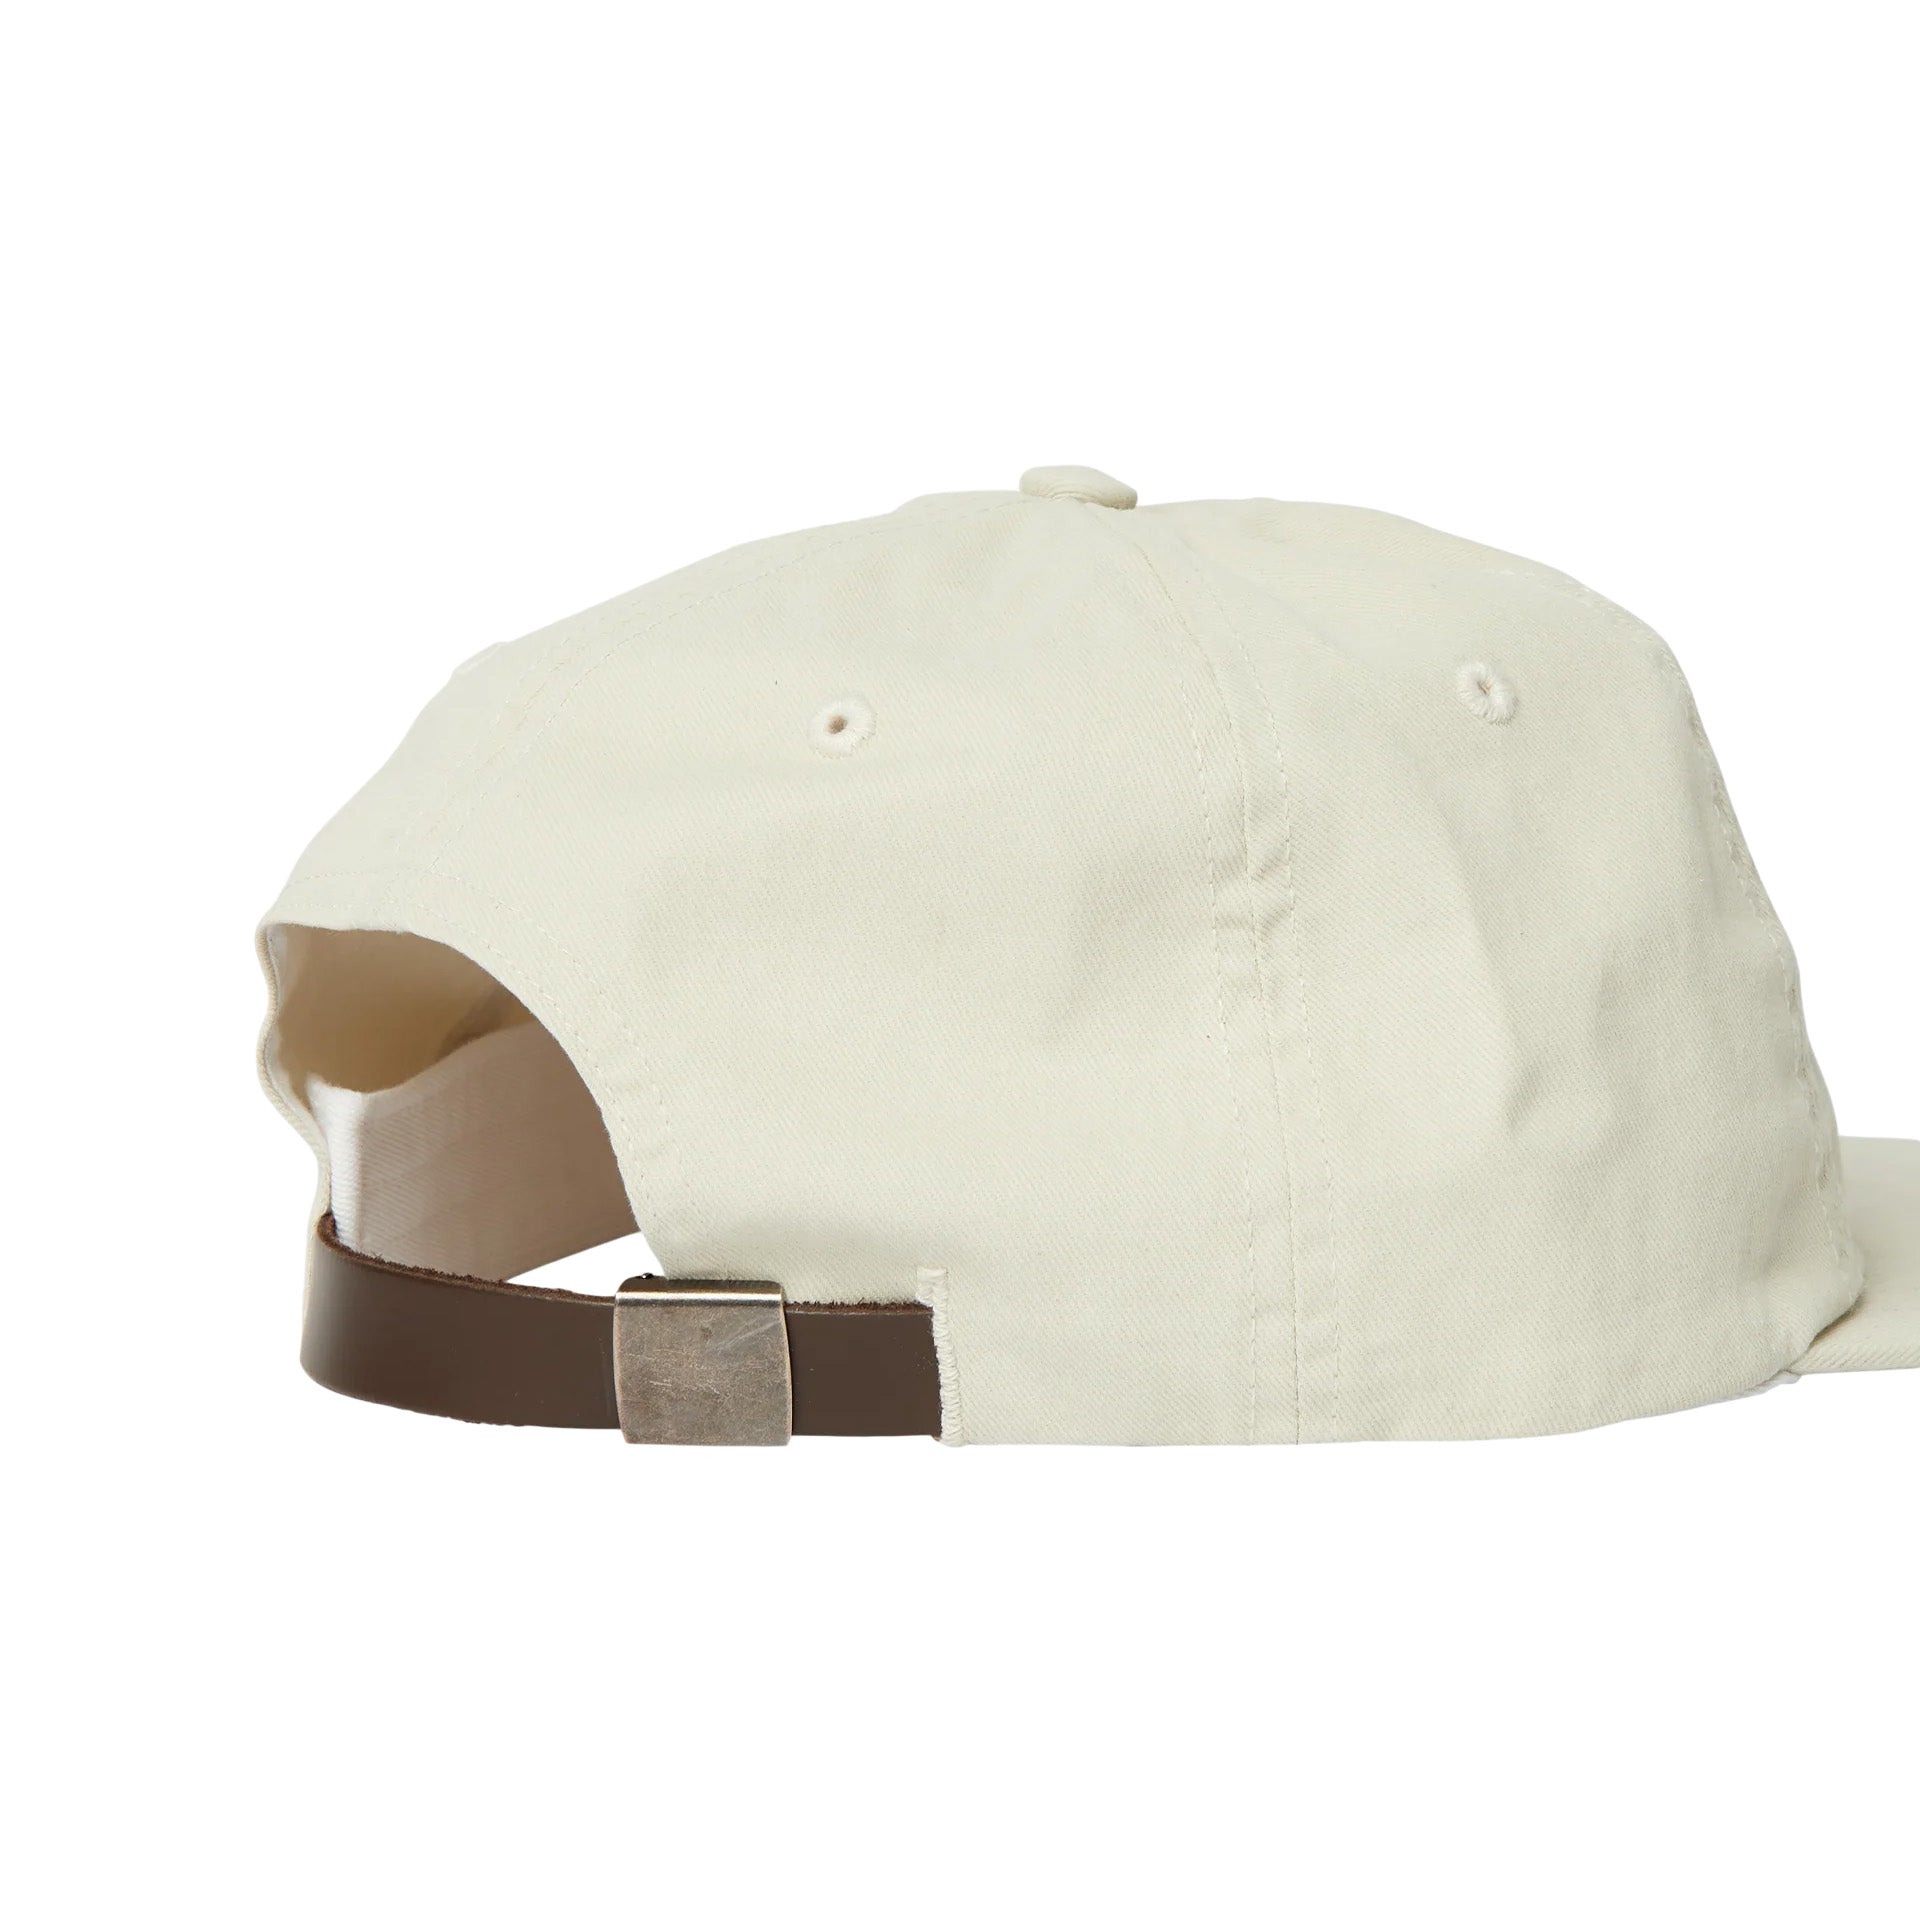 By Parra Fast Food Logo 6 Panel Hat 'Off White'